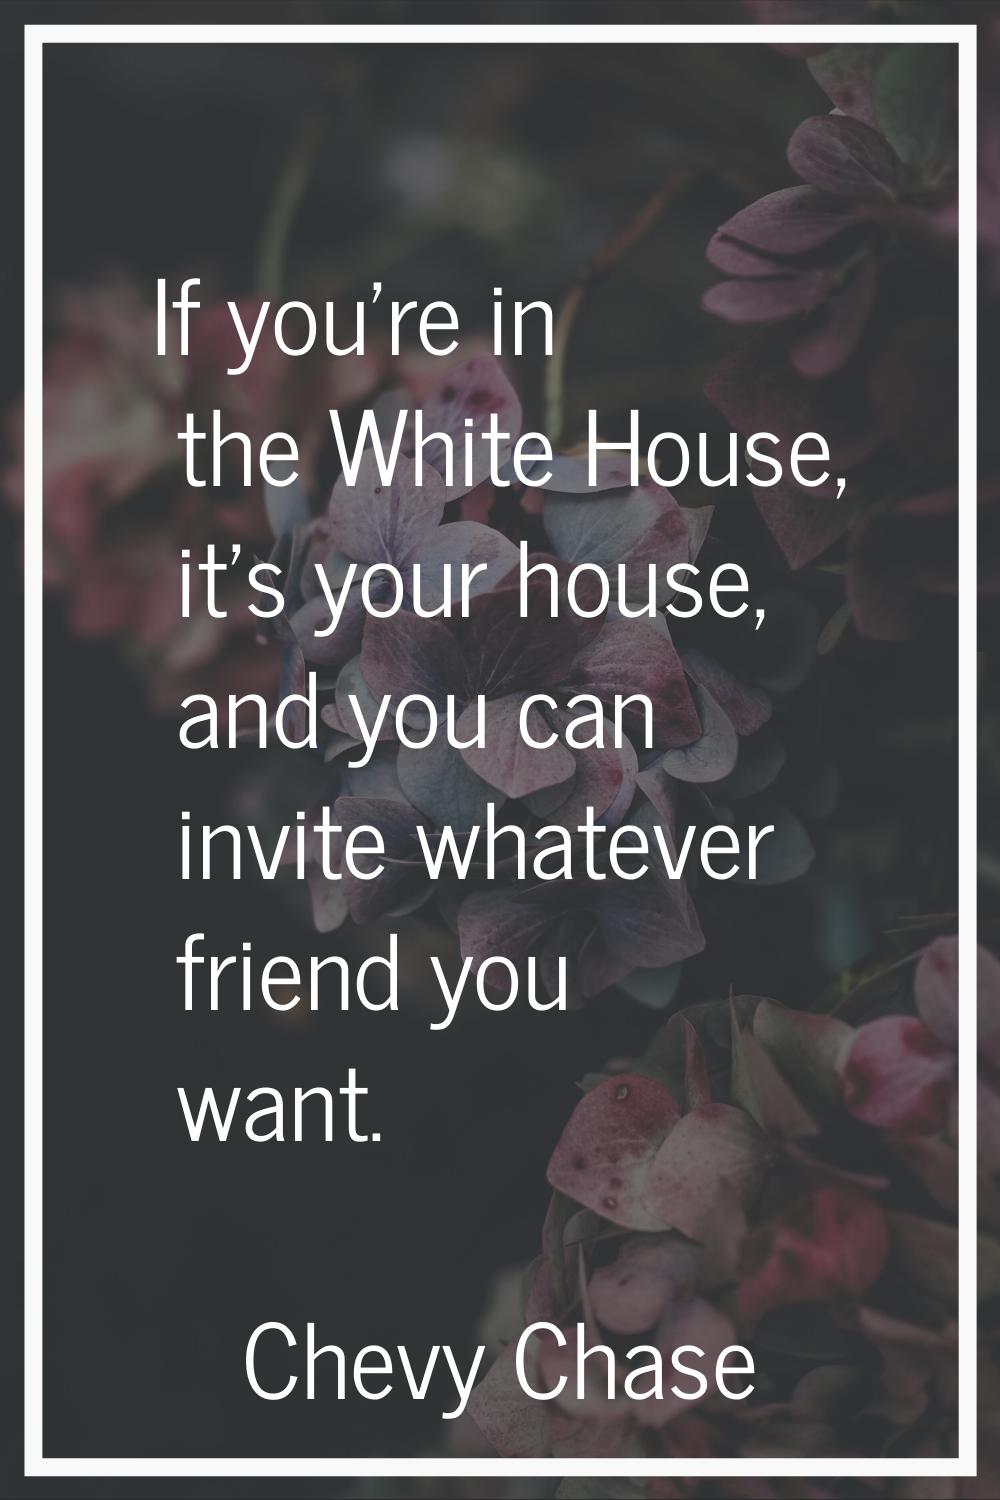 If you're in the White House, it's your house, and you can invite whatever friend you want.